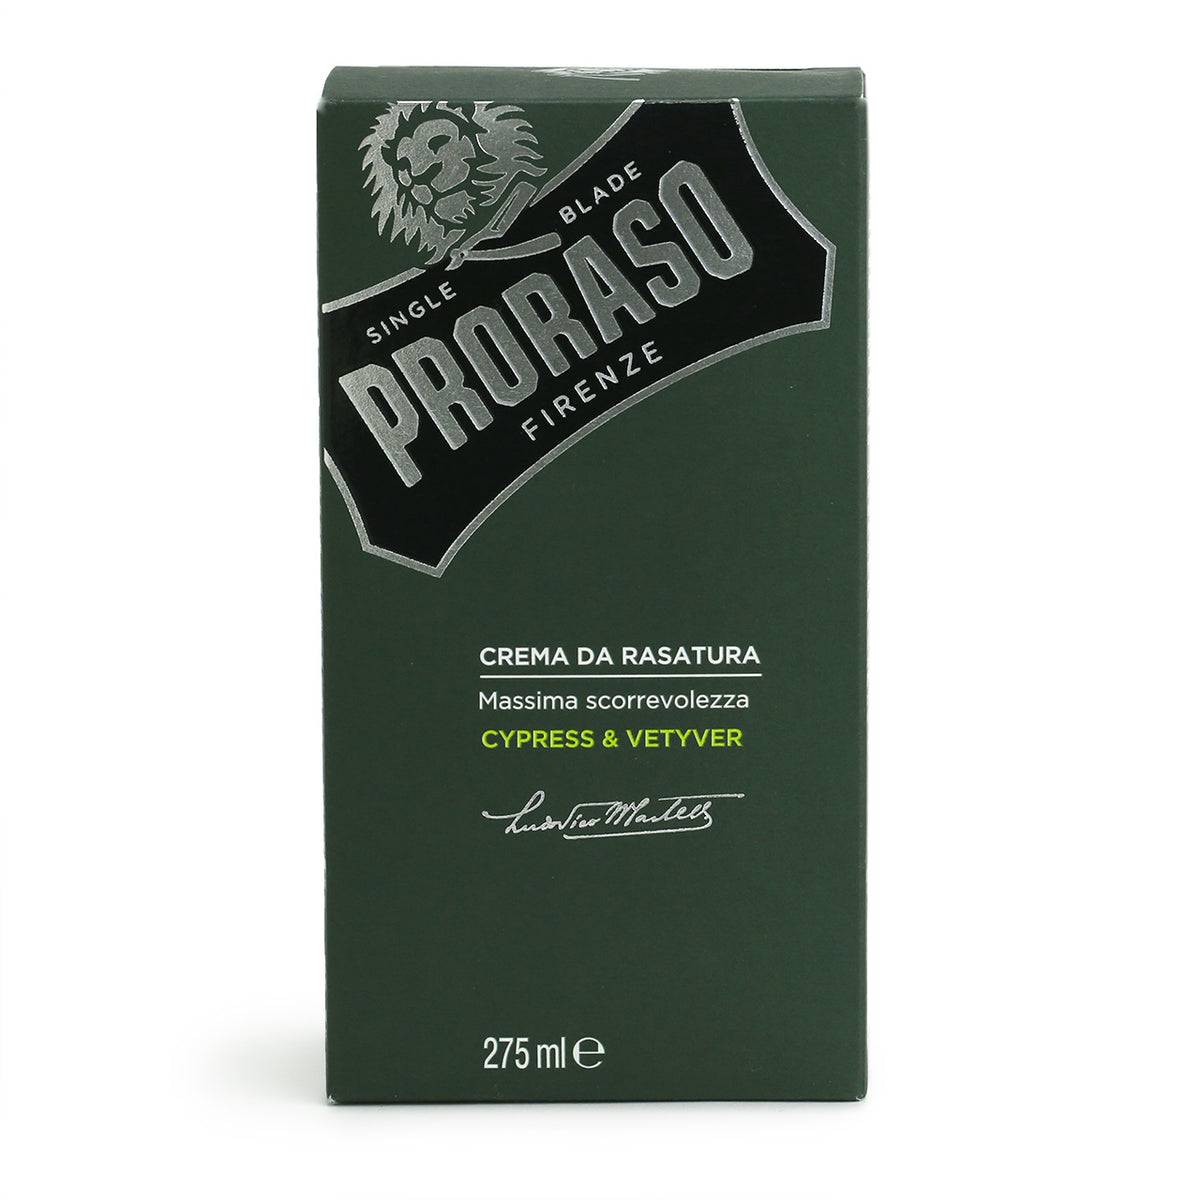 The dark green outer box of the Proraso Cypress &amp; Vetyver shaving cream